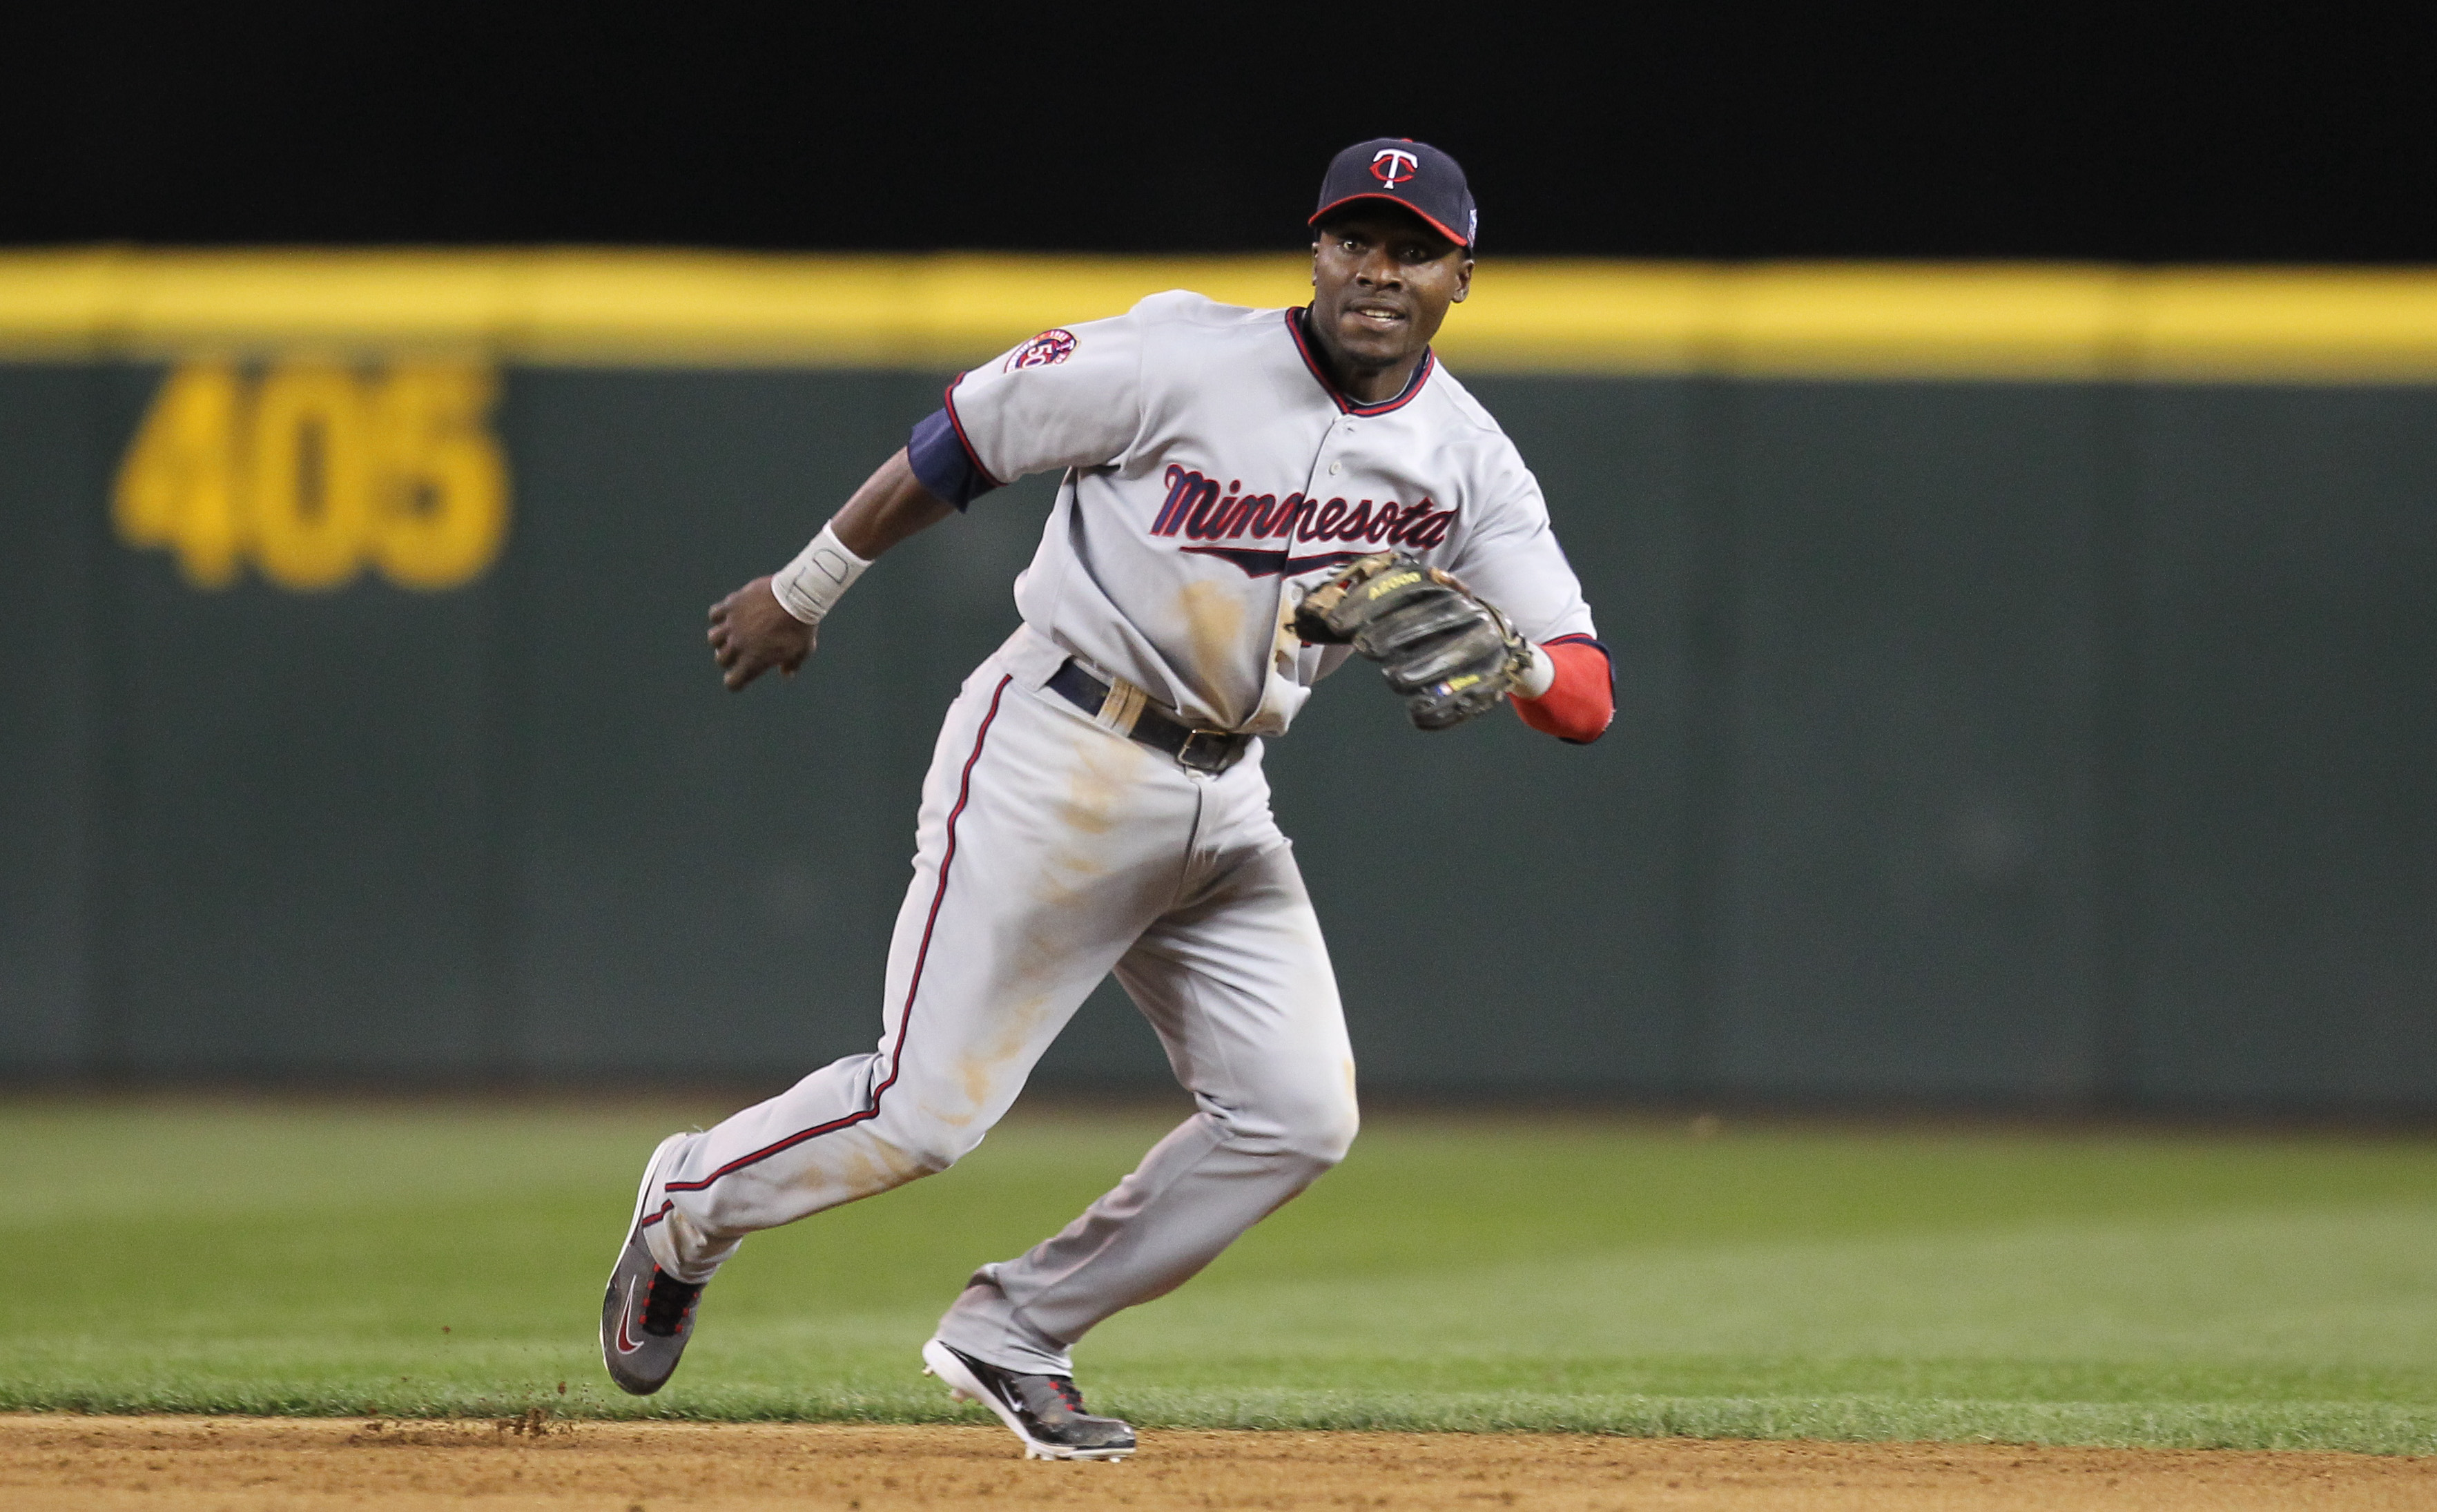 SEATTLE - AUGUST 27:  Second baseman Orlando Hudson #1 of the Minnesota Twins follows the play against the Seattle Mariners at Safeco Field on August 27, 2010 in Seattle, Washington. The Twins won 6-3. (Photo by Otto Greule Jr/Getty Images)